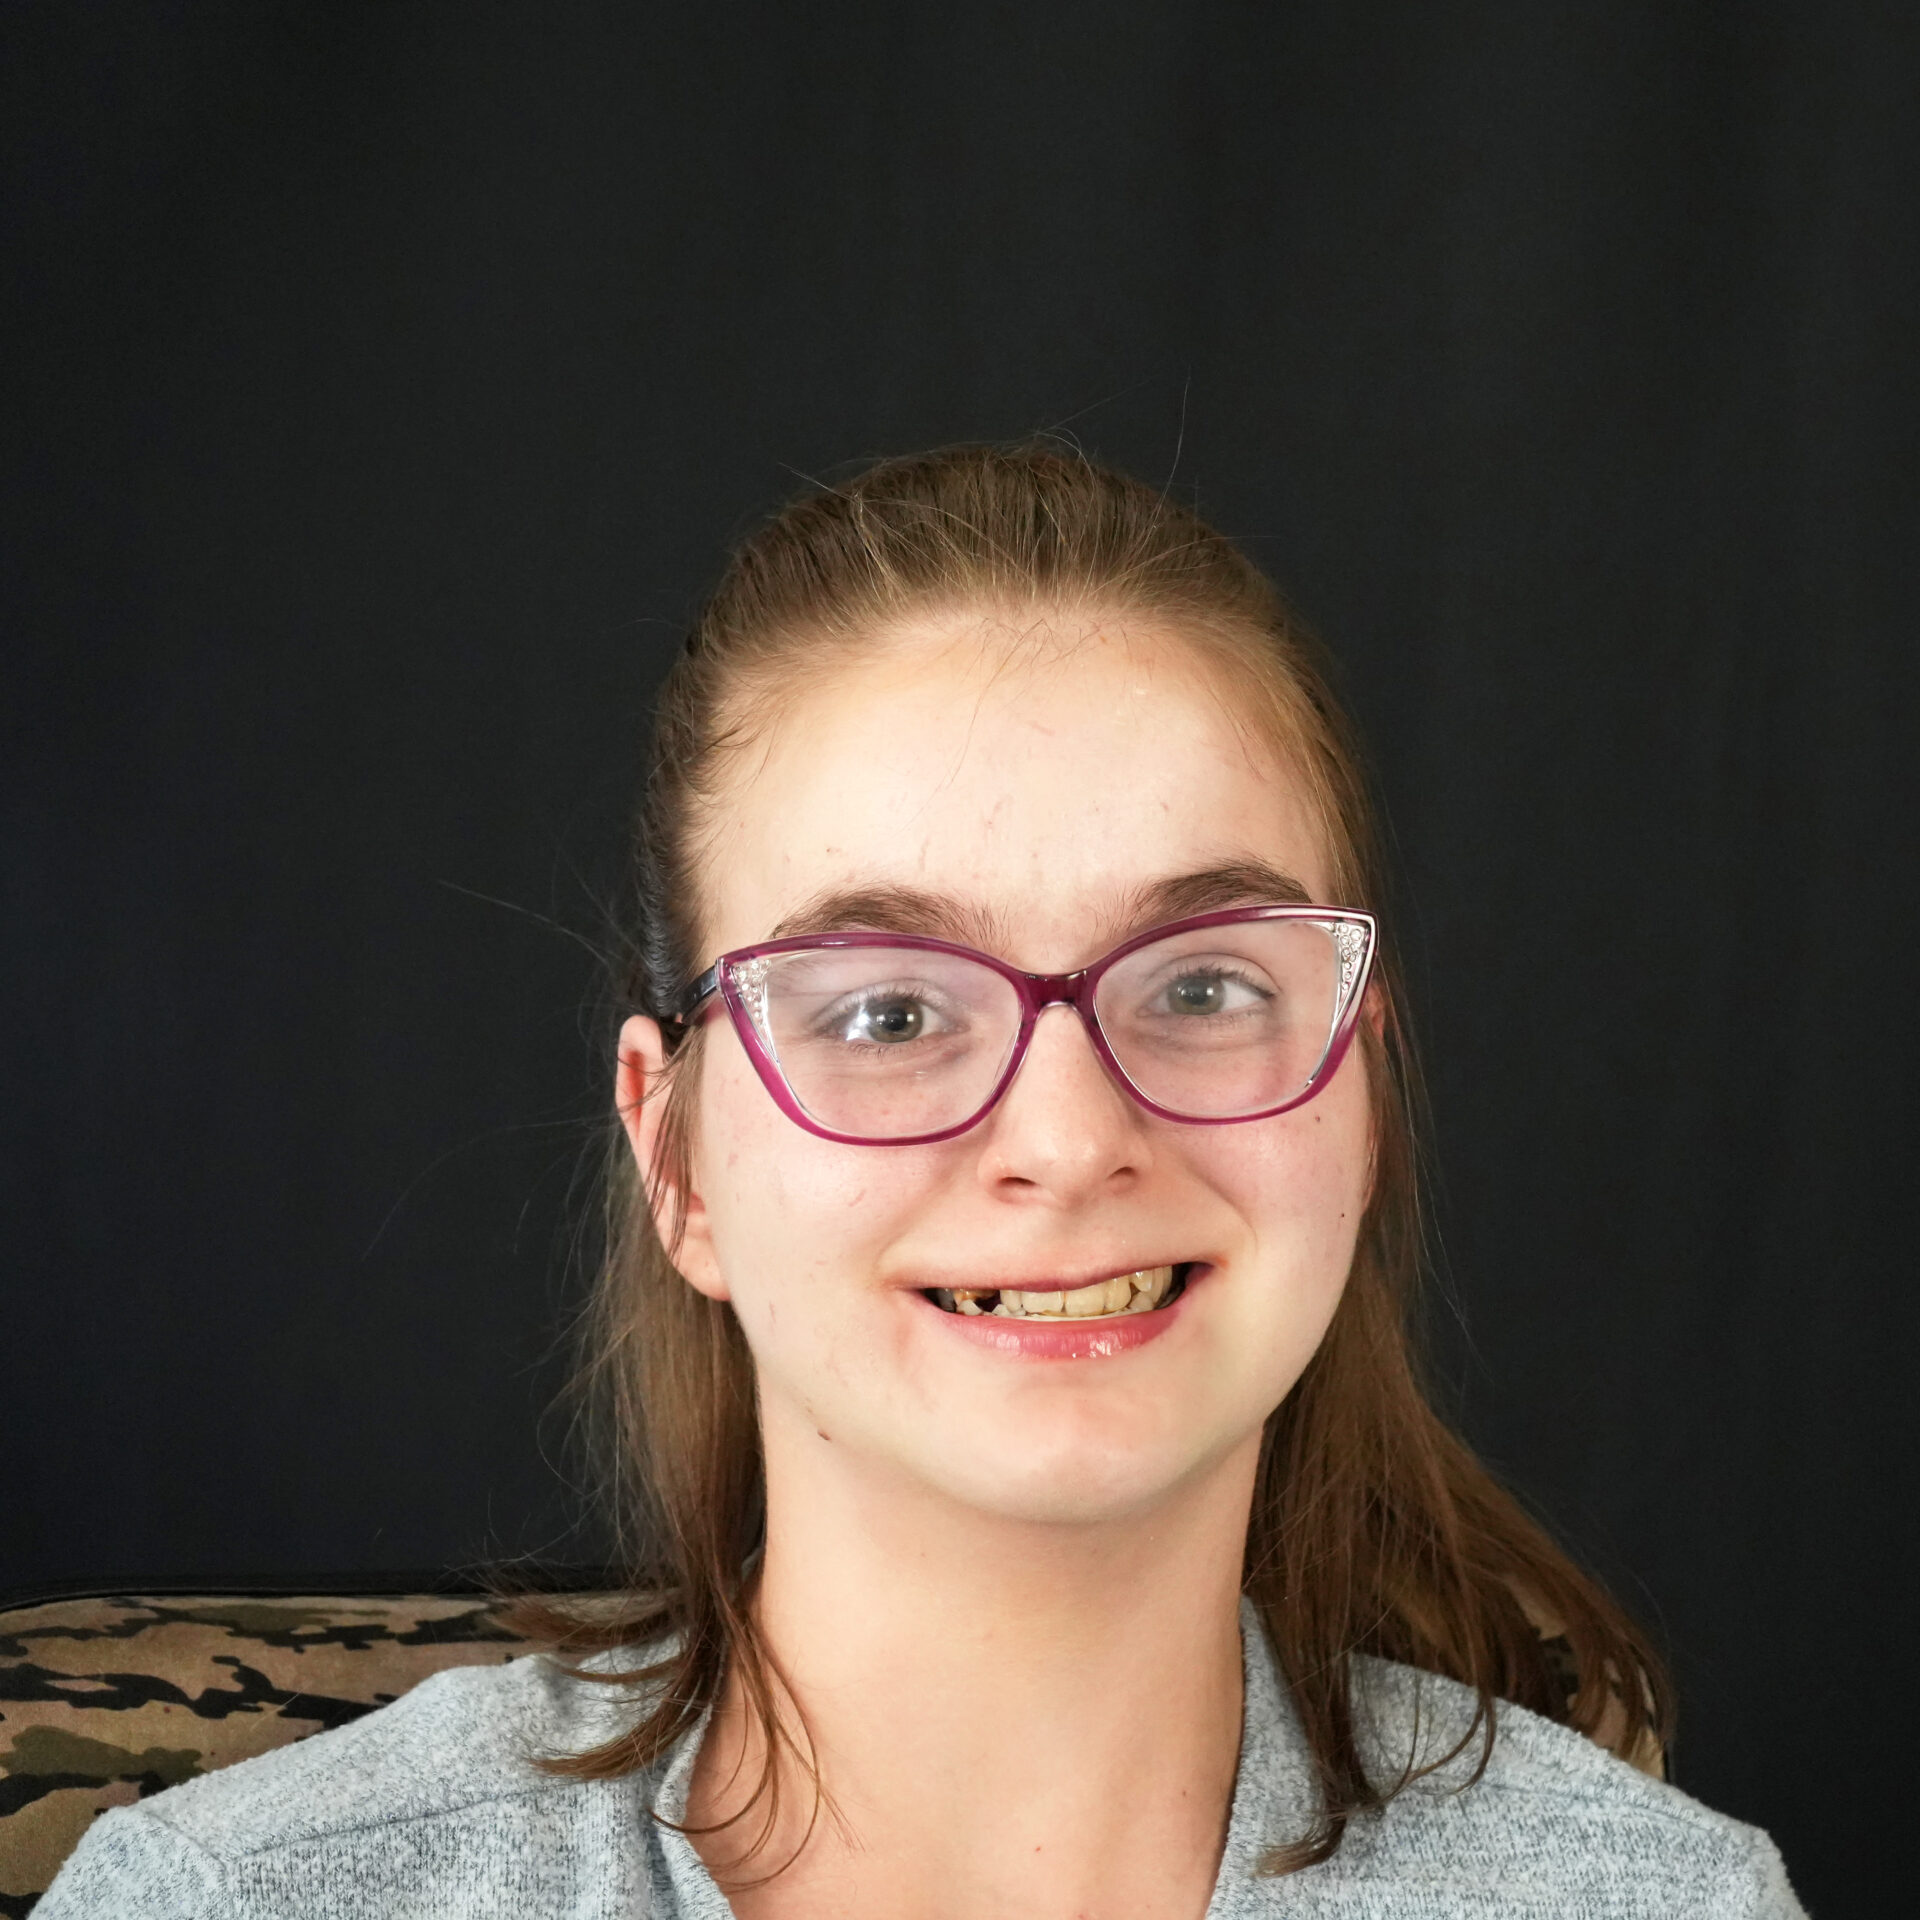 headshot of Jeanie wearing red glasses and smiling